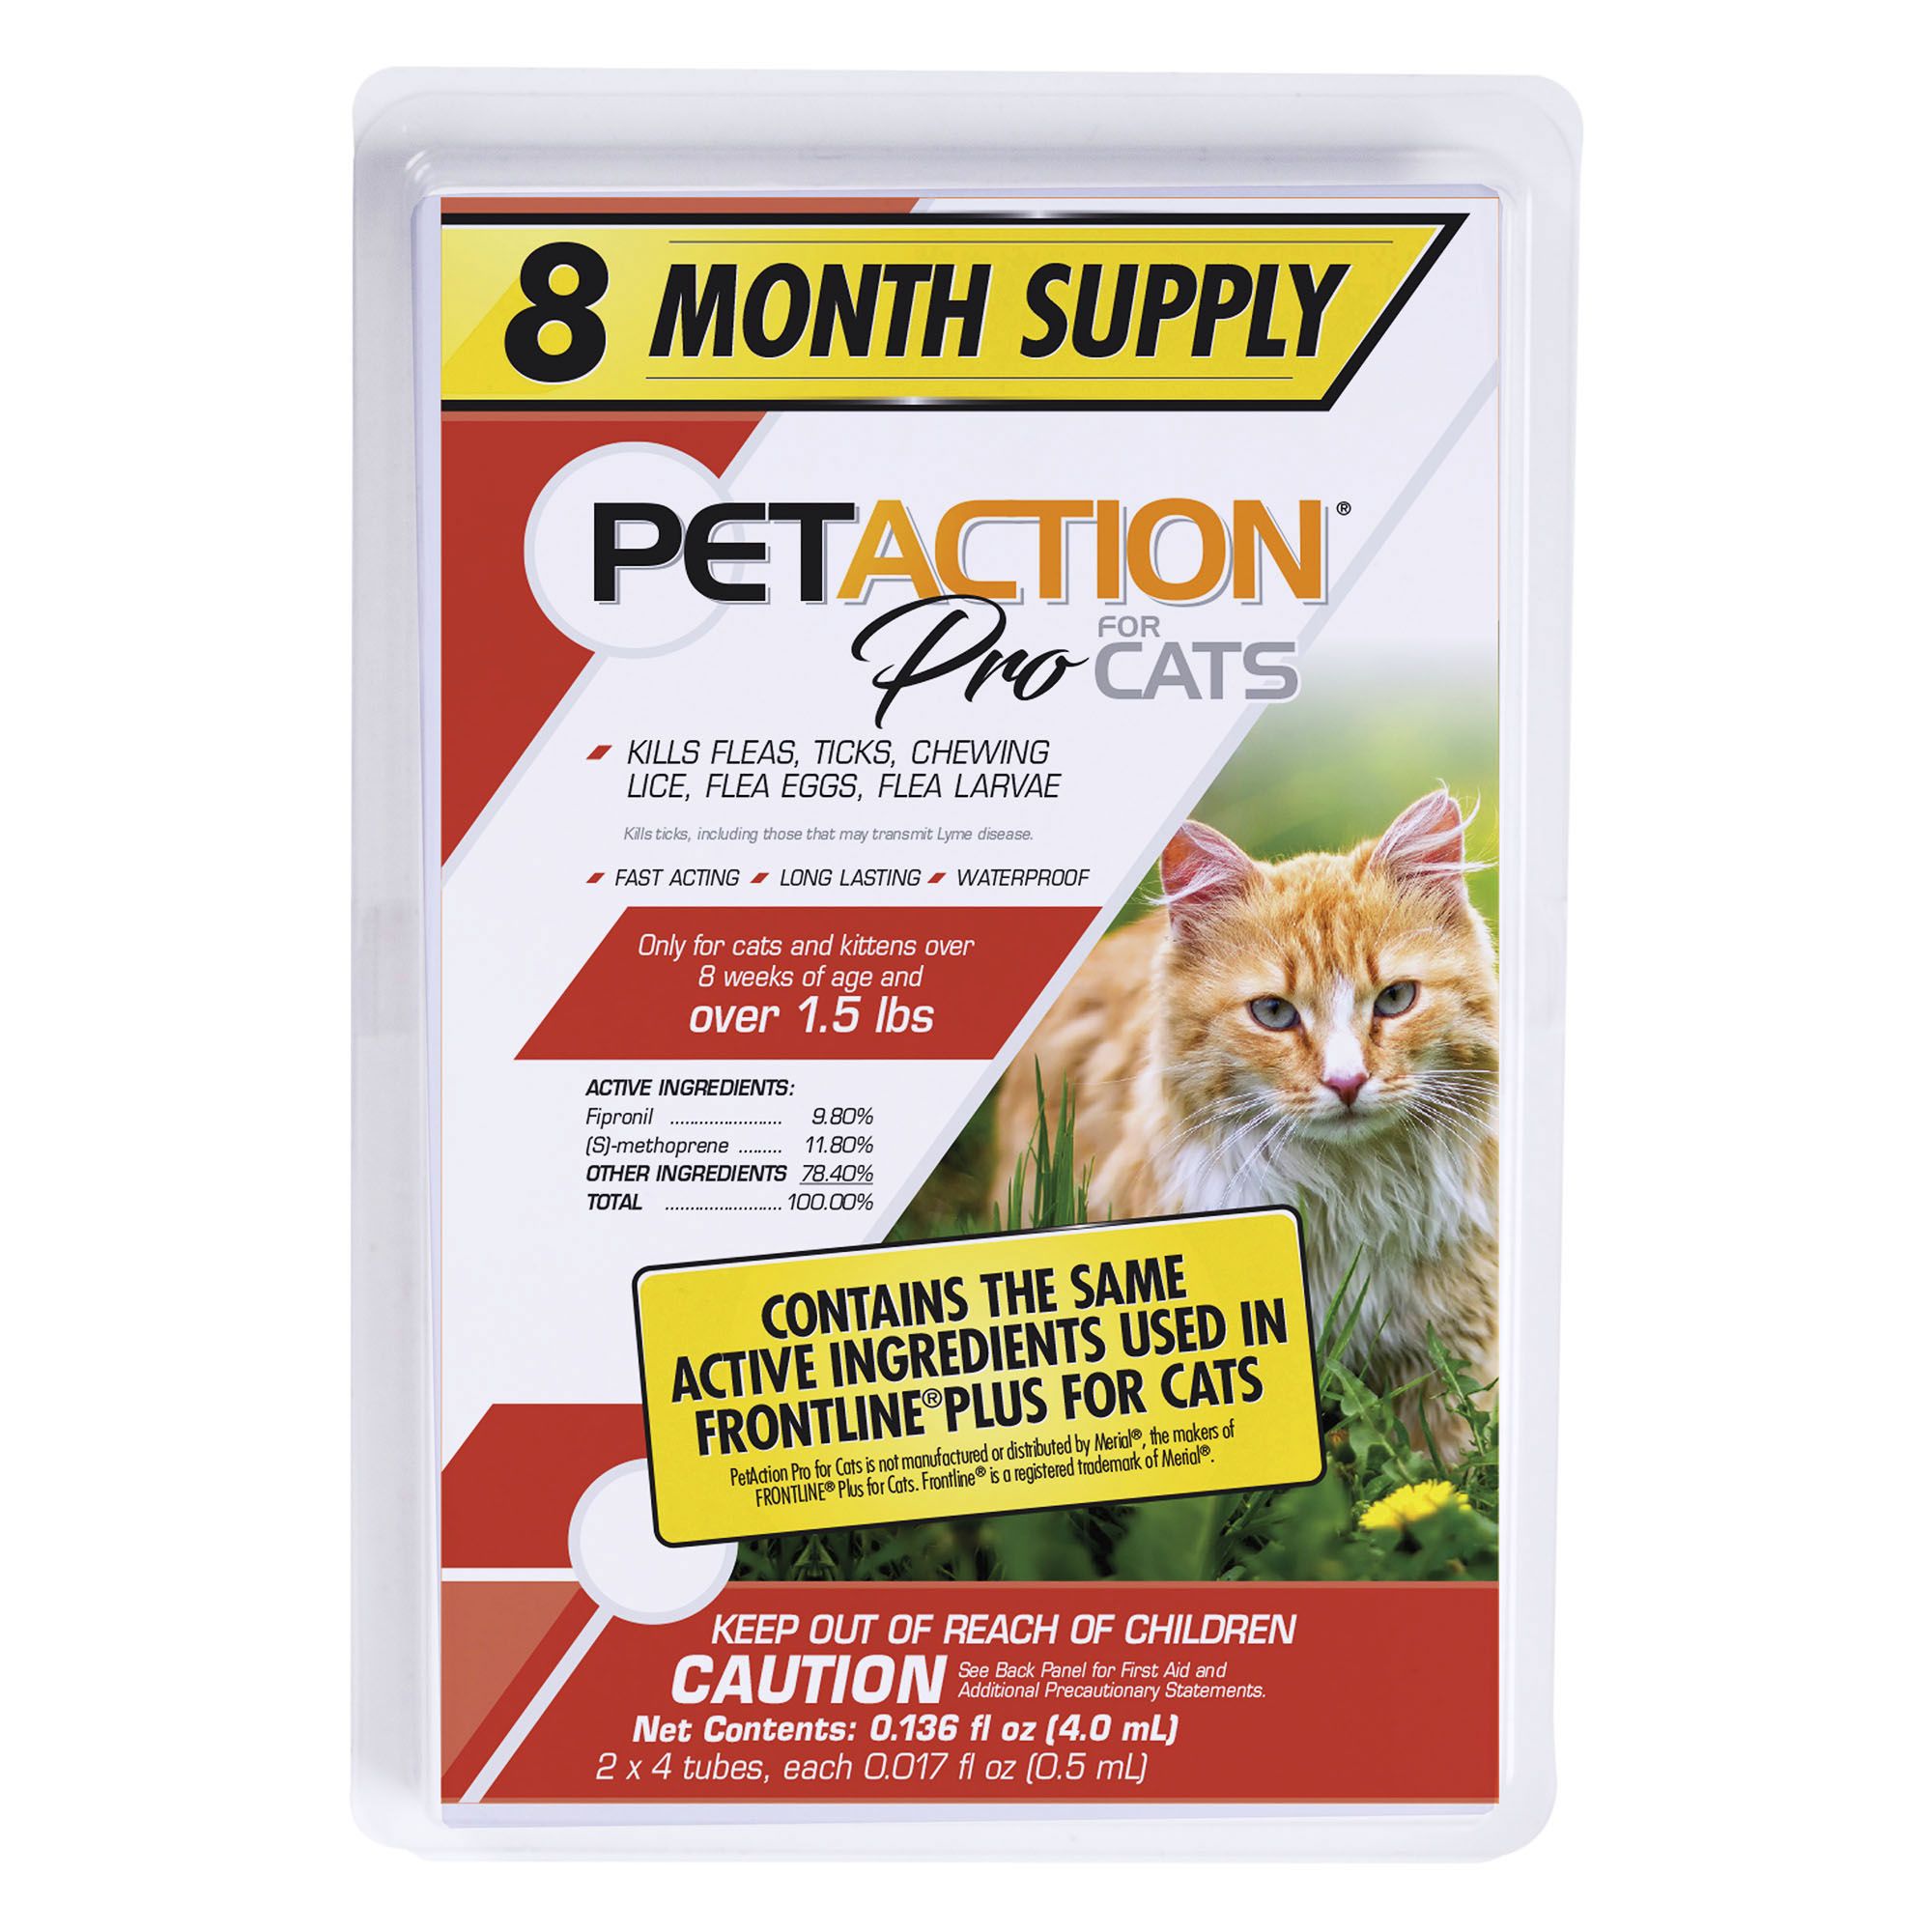 frontline plus for cats coupon